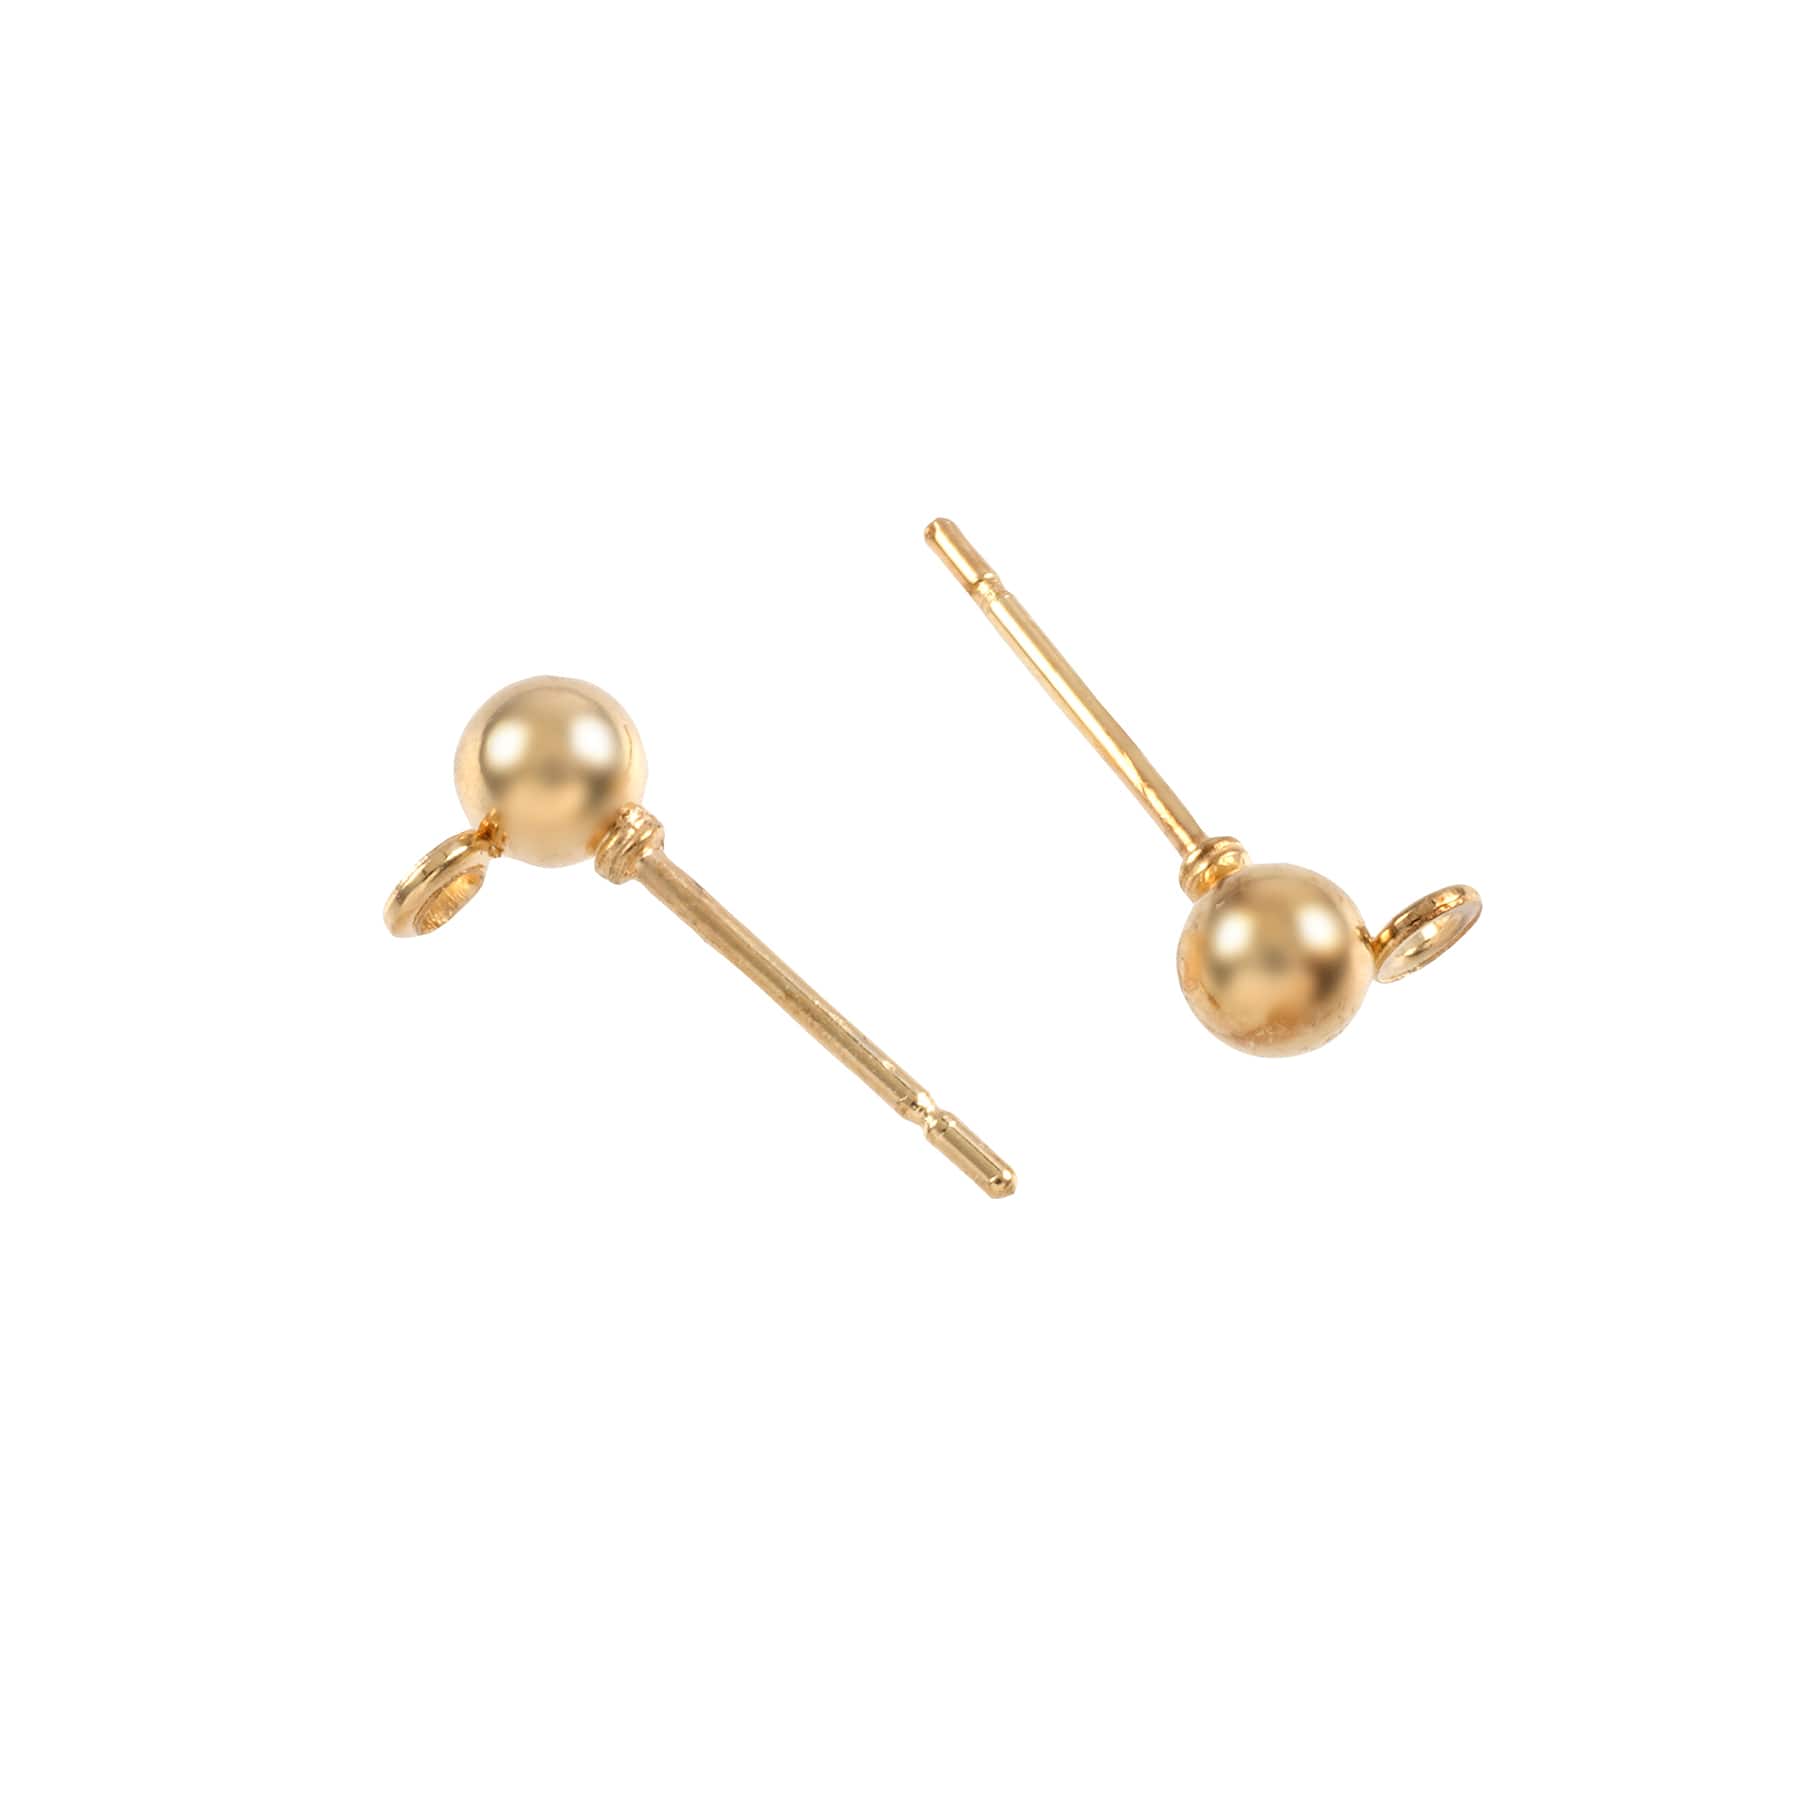 12 Pack: Gold Earring Post Ball Tops, 4mm by Bead Landing™